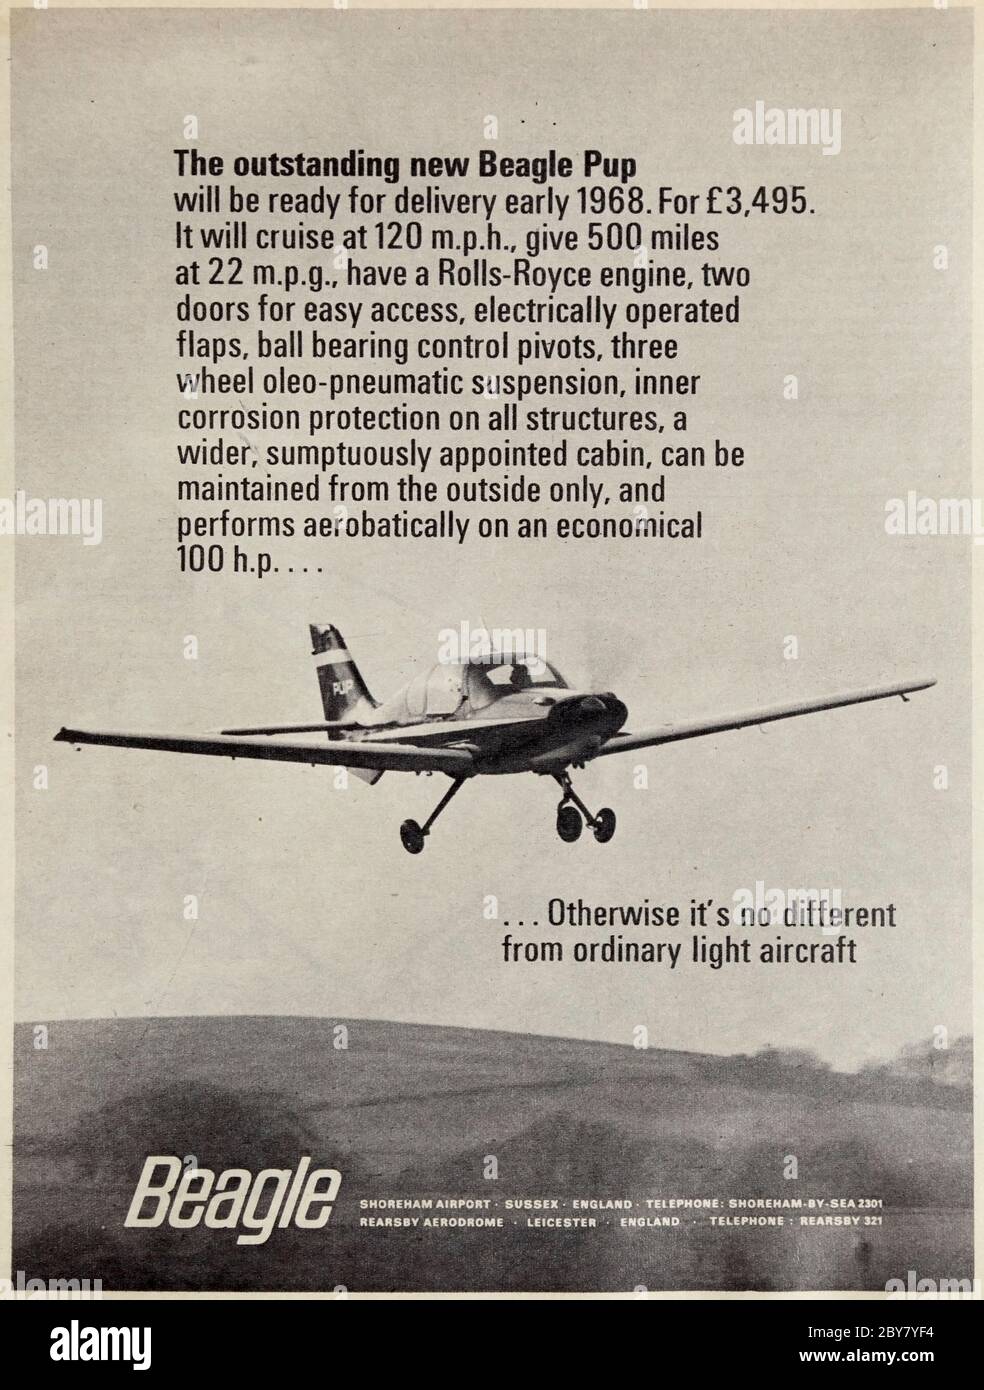 Vintage advertisement for the Beagle Pup light aircraft. Stock Photo